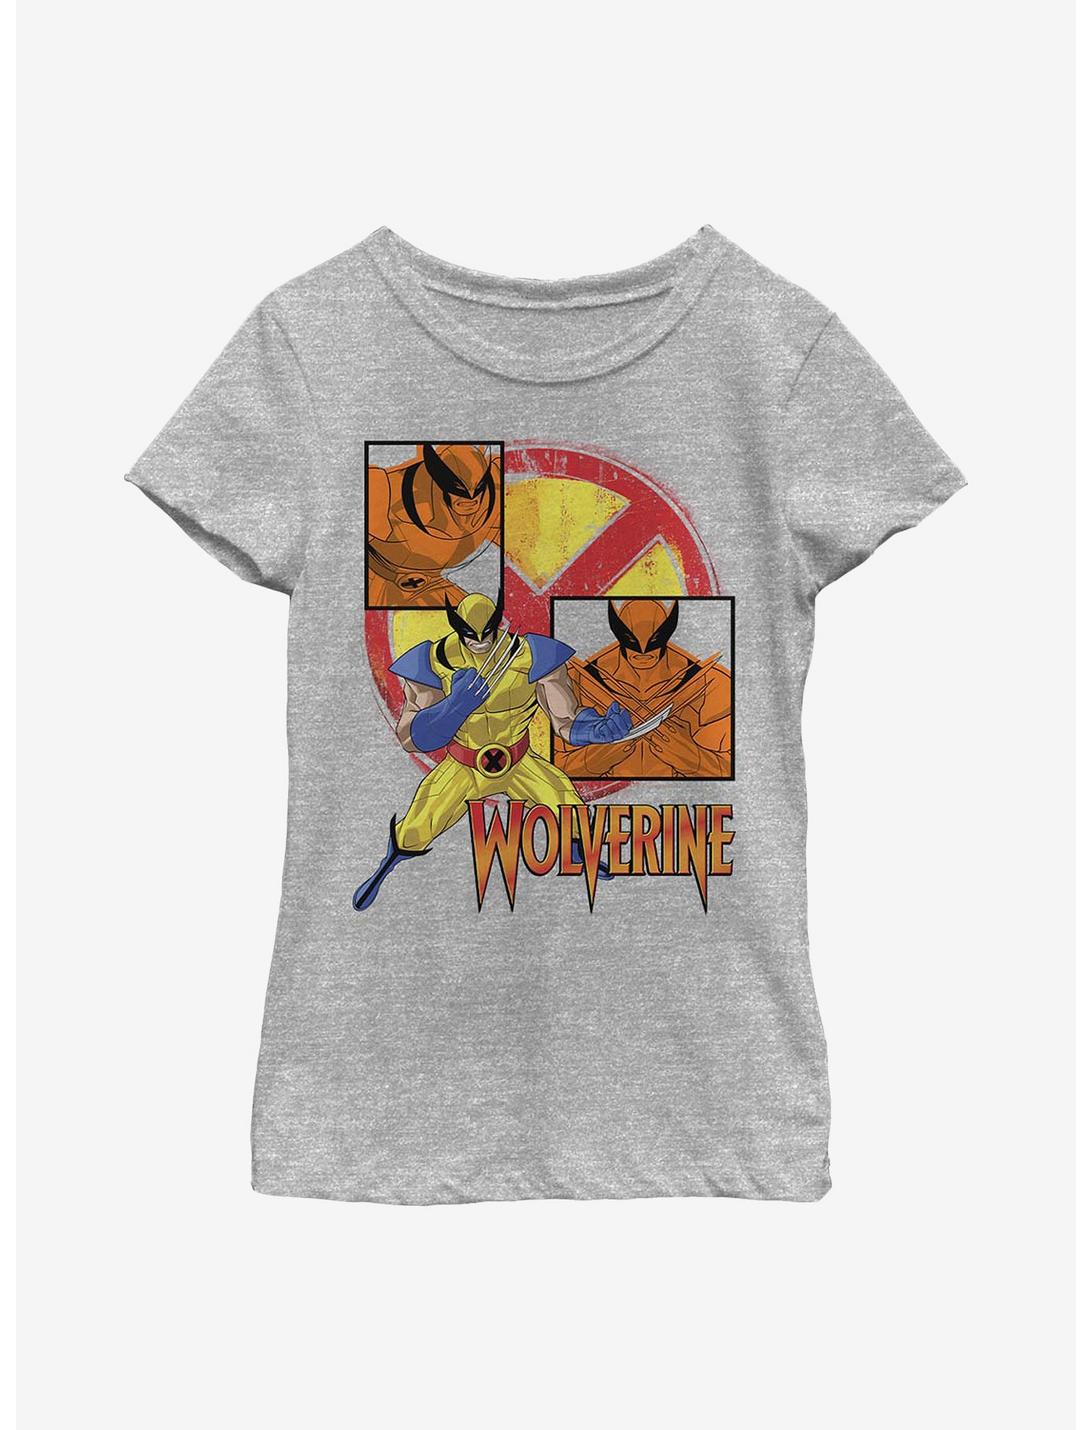 Marvel Wolverine Claw Panels Youth Girls T-Shirt, ATH HTR, hi-res